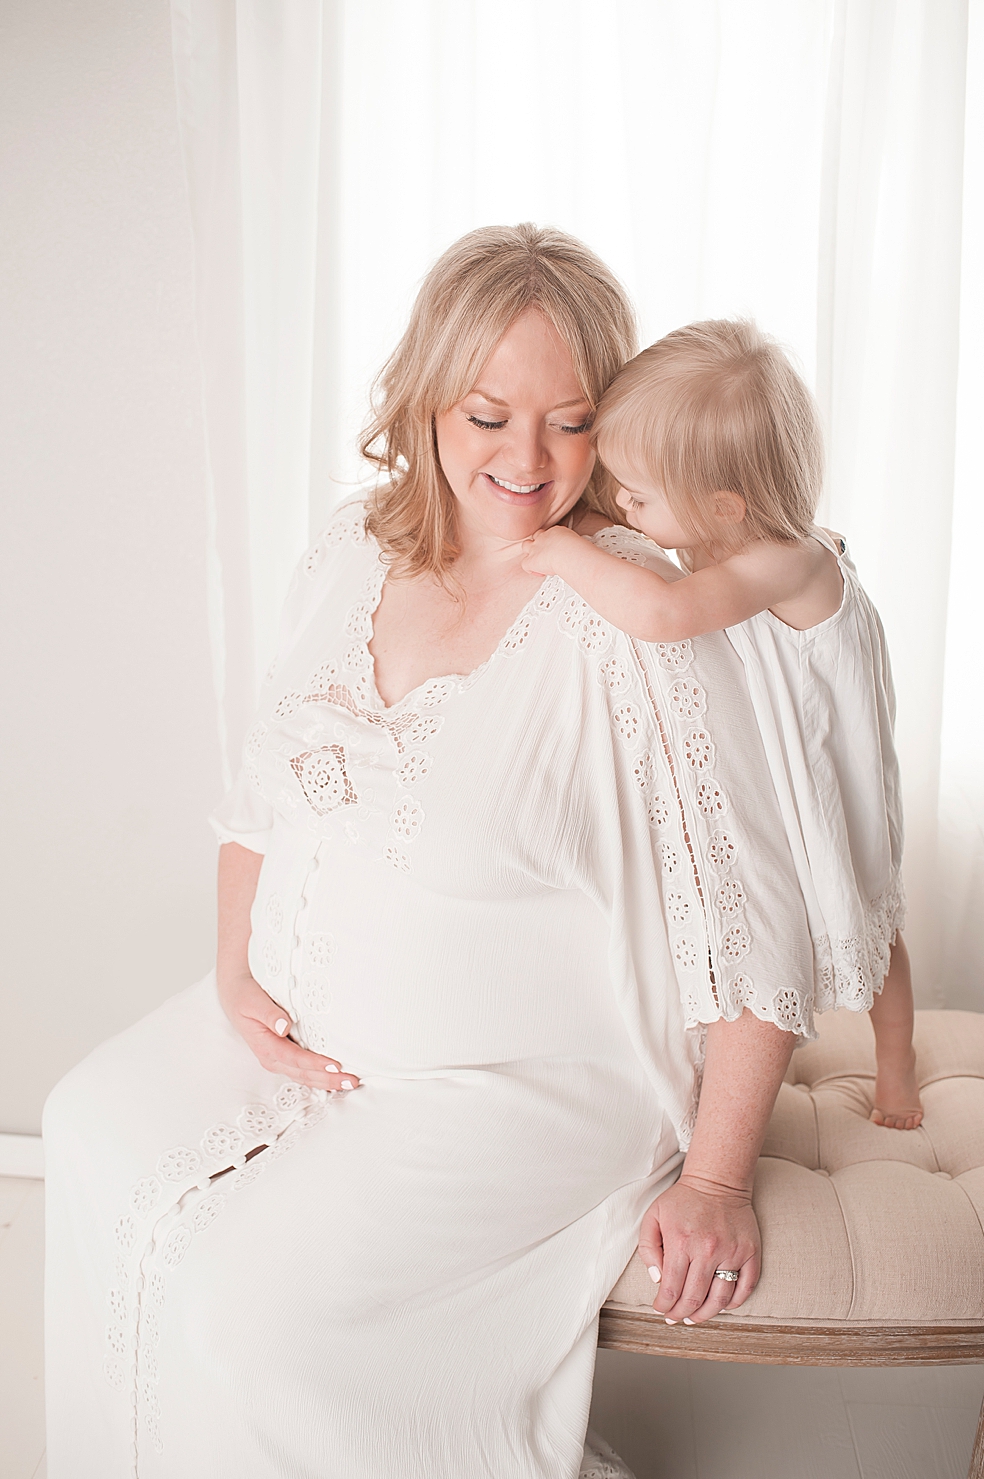 Mom in a long white dress with her little girl in white | Photo by Jessica Lee Photography